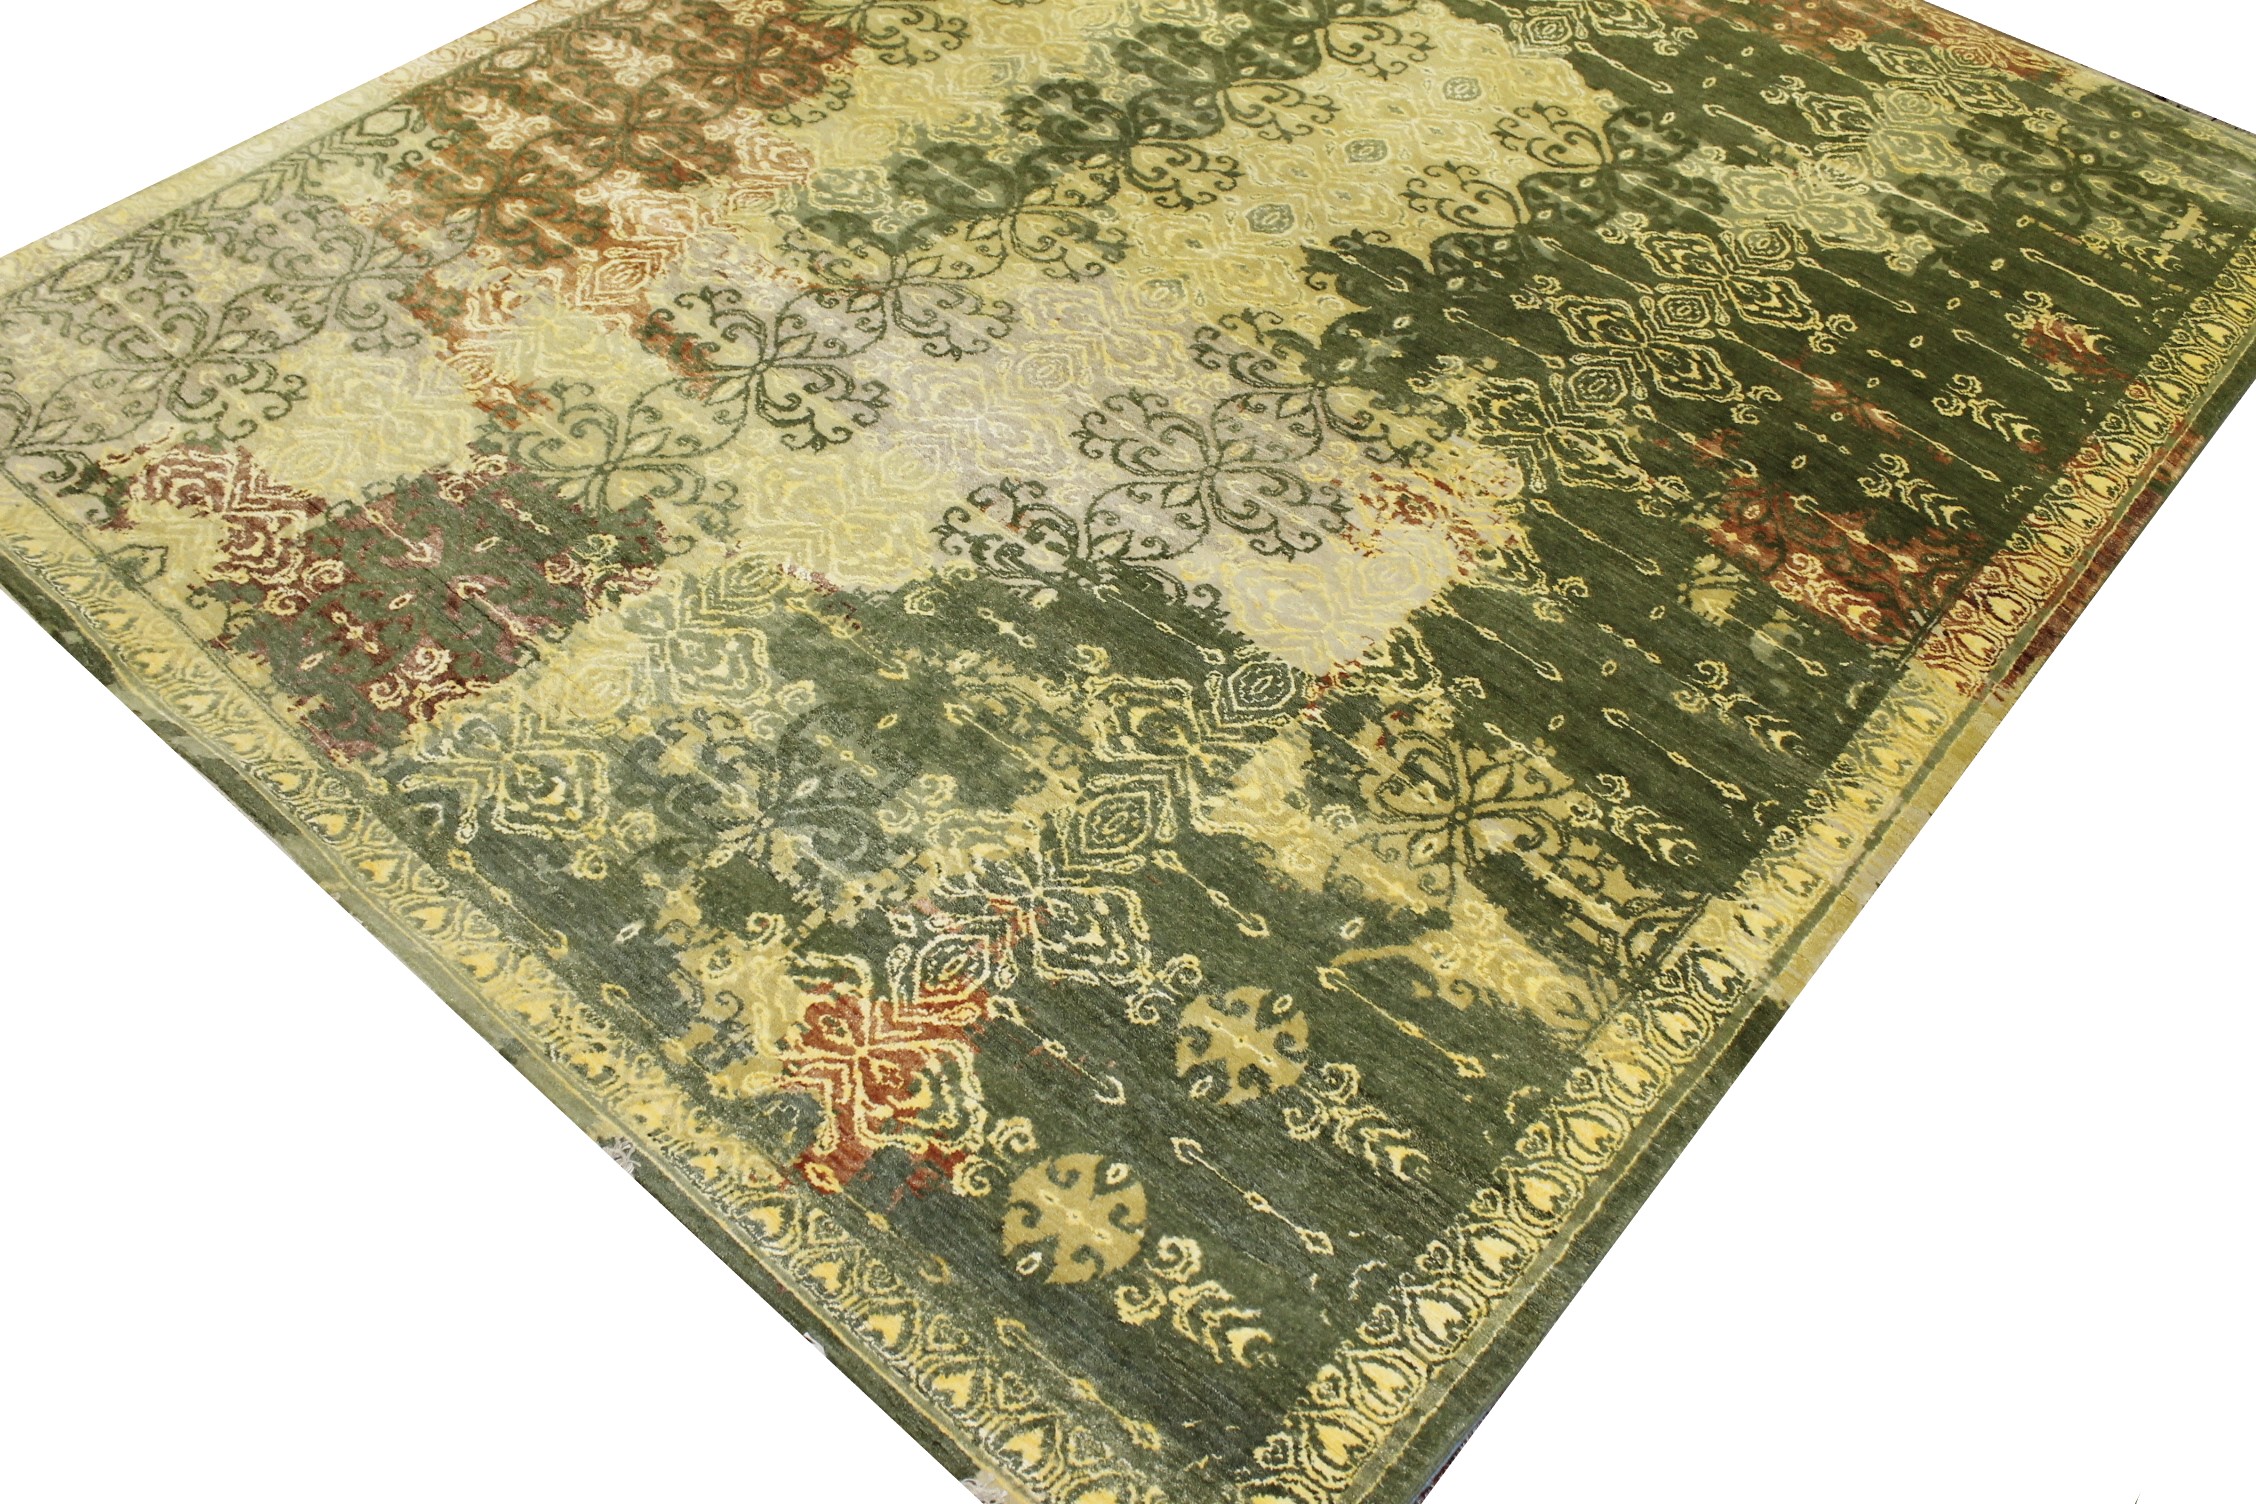 8x10 Contemporary Hand Knotted Wool Area Rug - MR022210